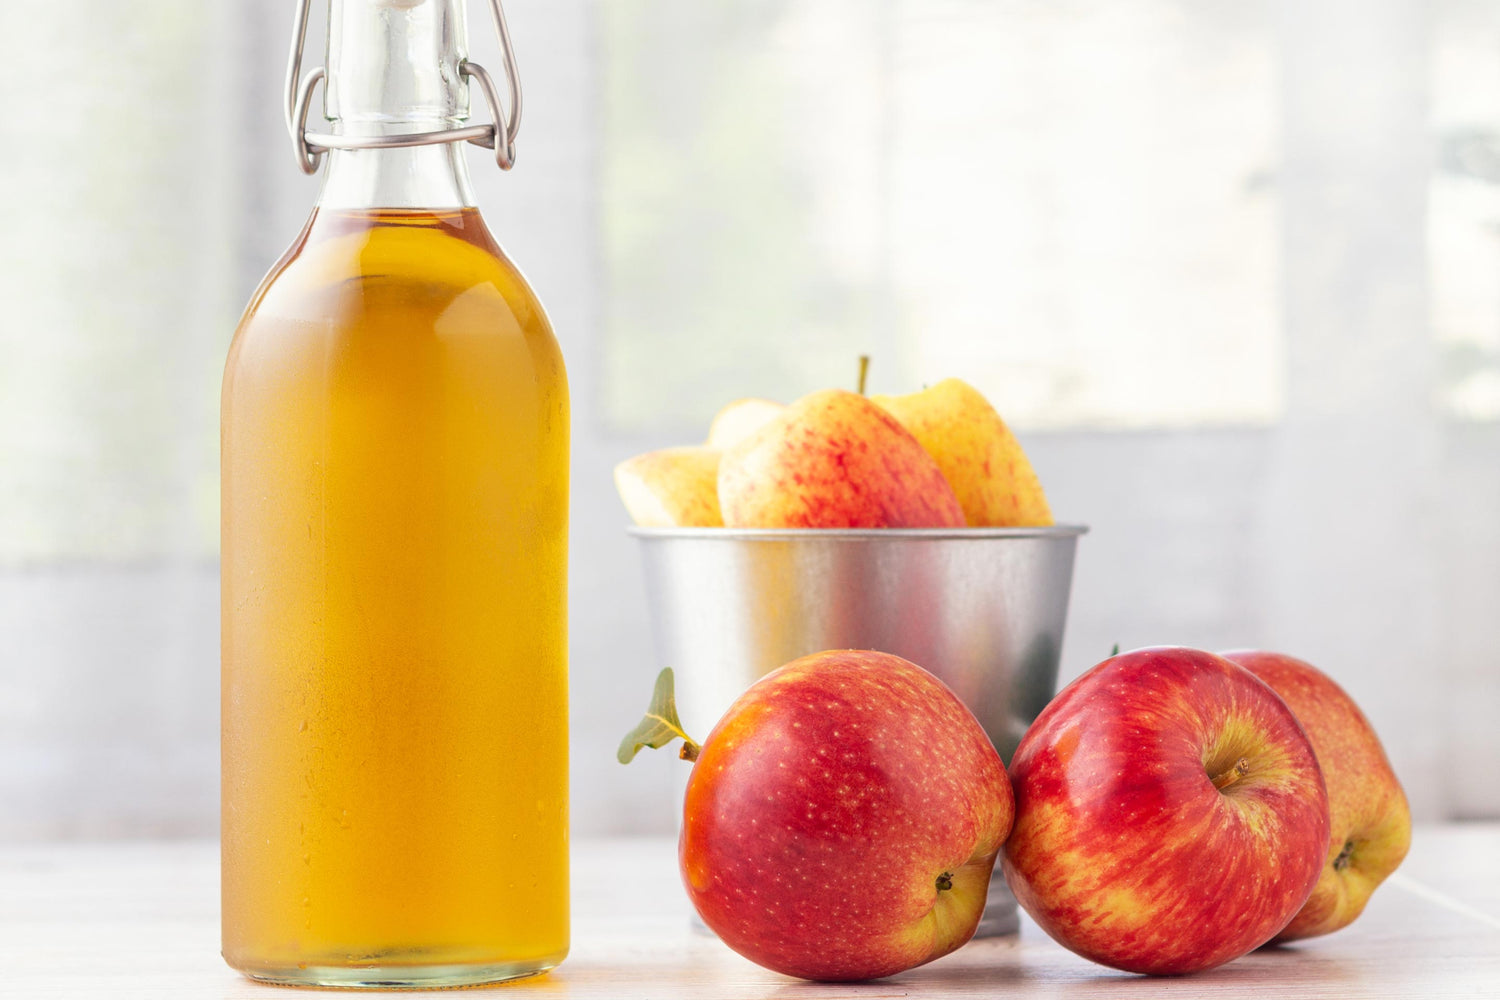 What's All the Excitement about Apple Cider Vinegar?